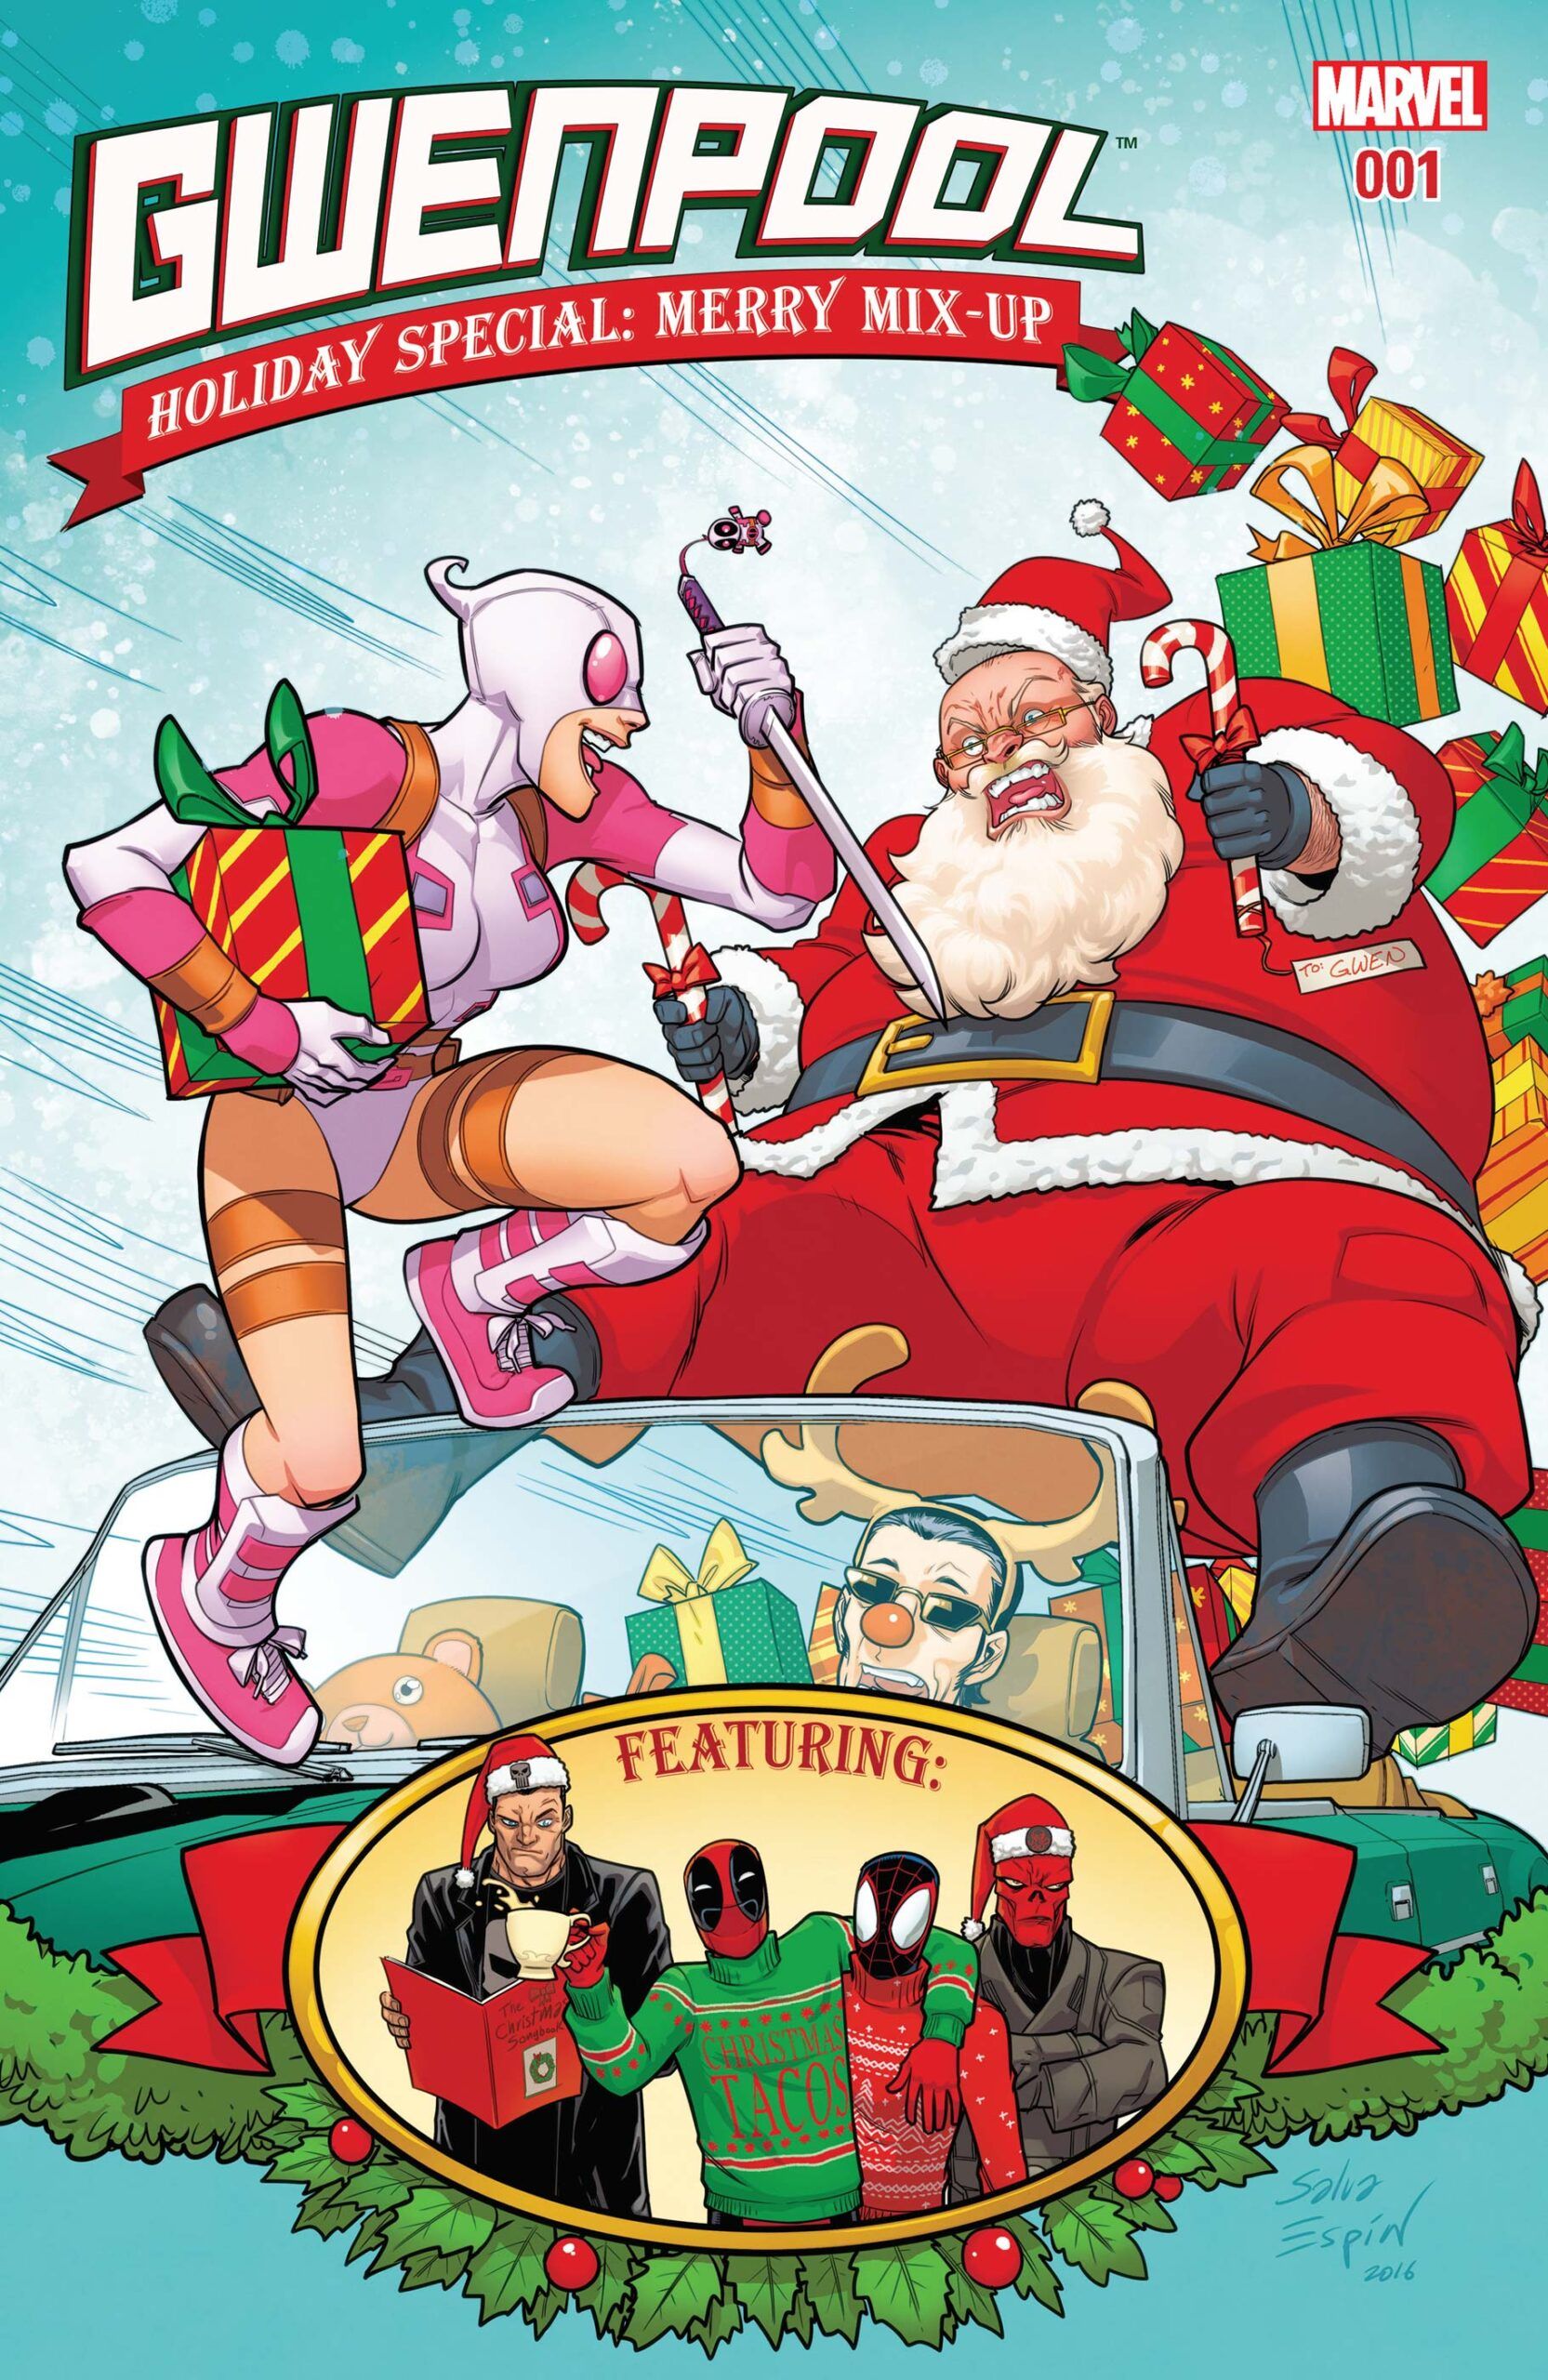 Cover of Gewnpool Holiday special